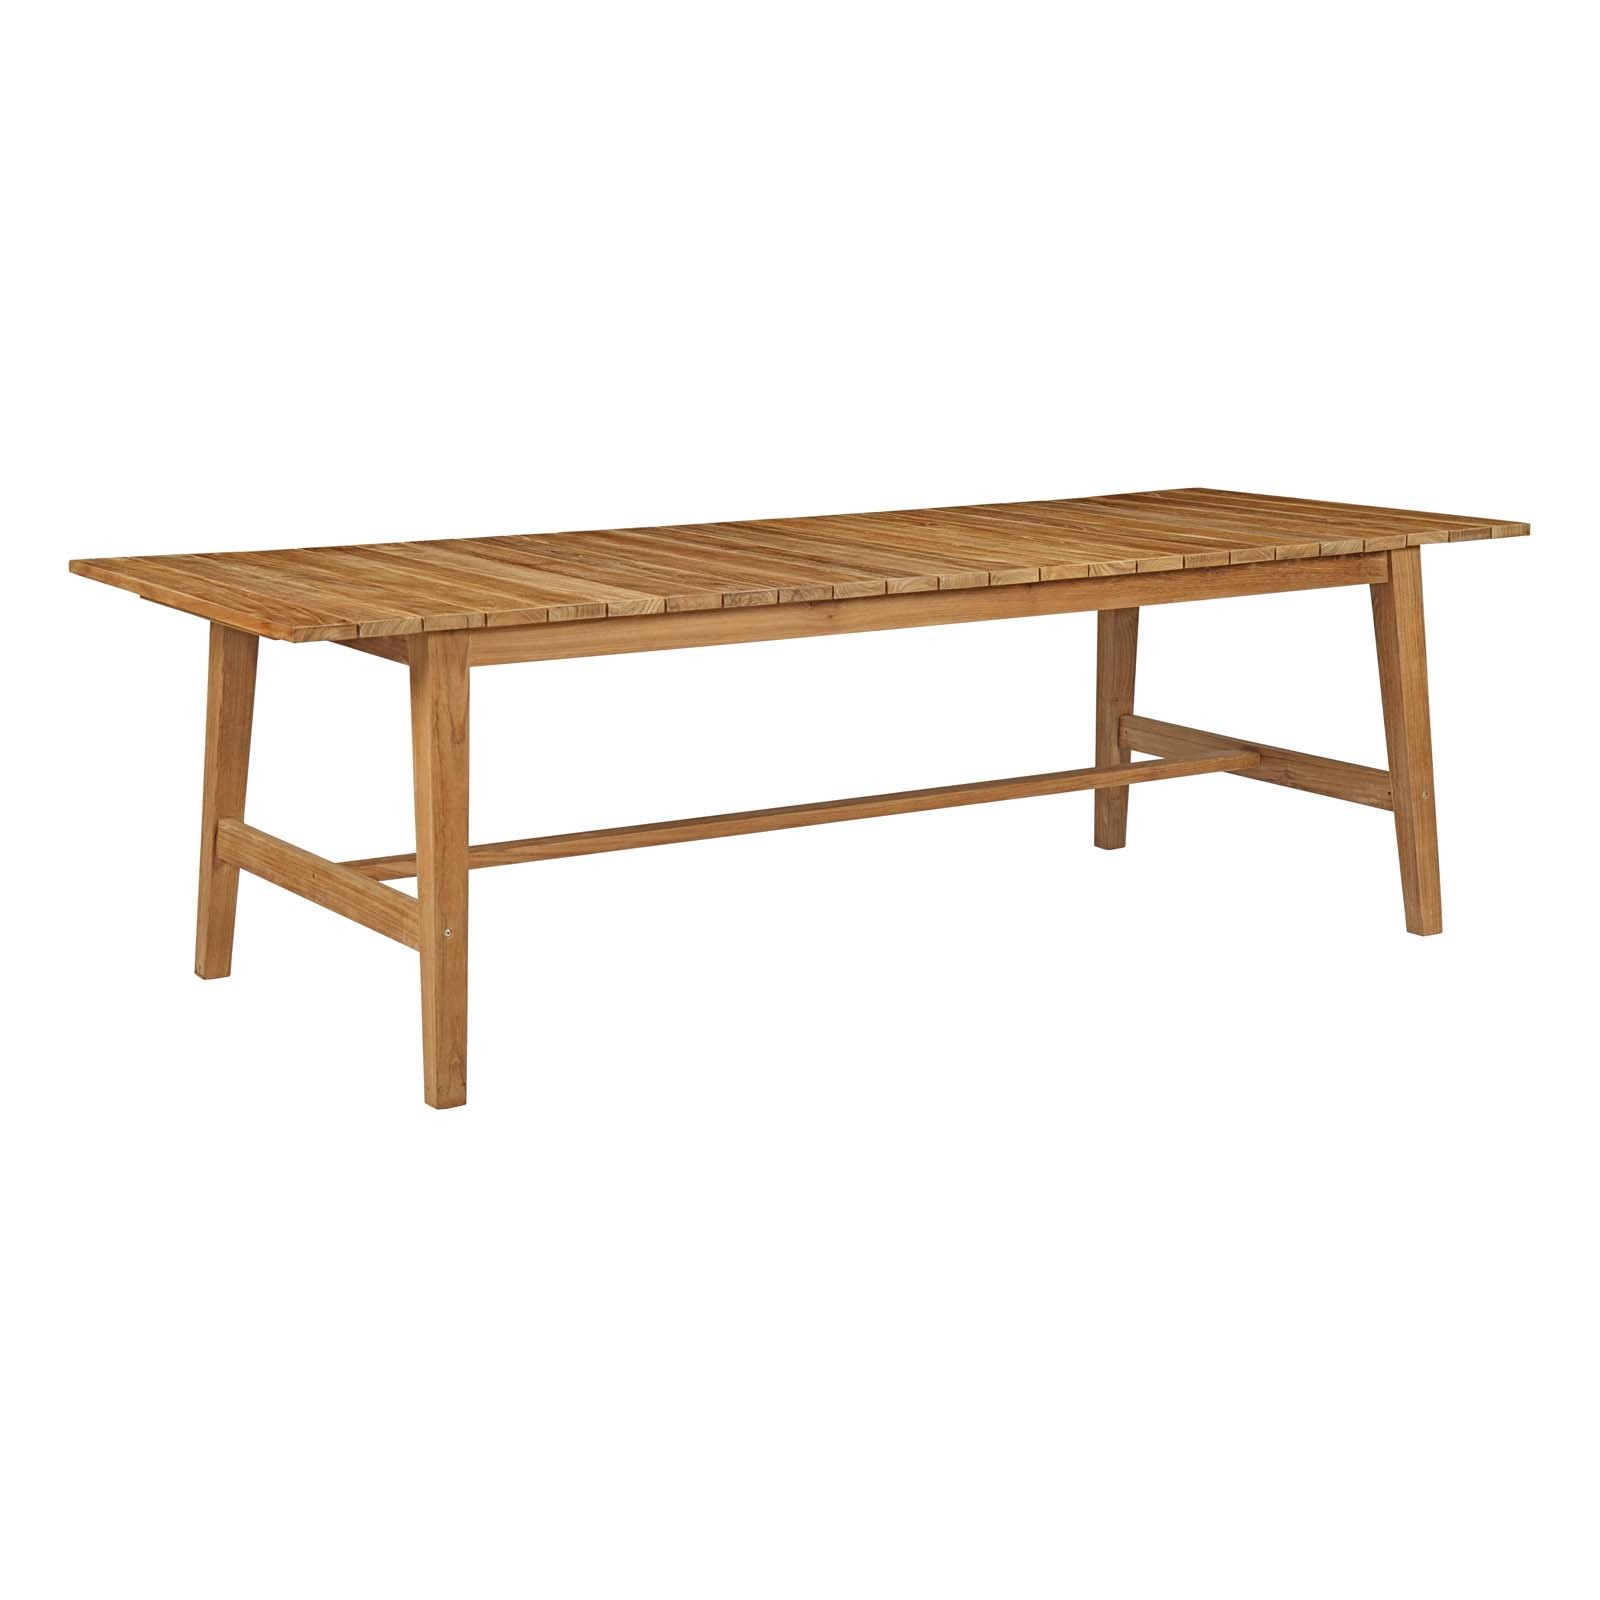 Dorset Outdoor Patio Teak Dining Table in Natural